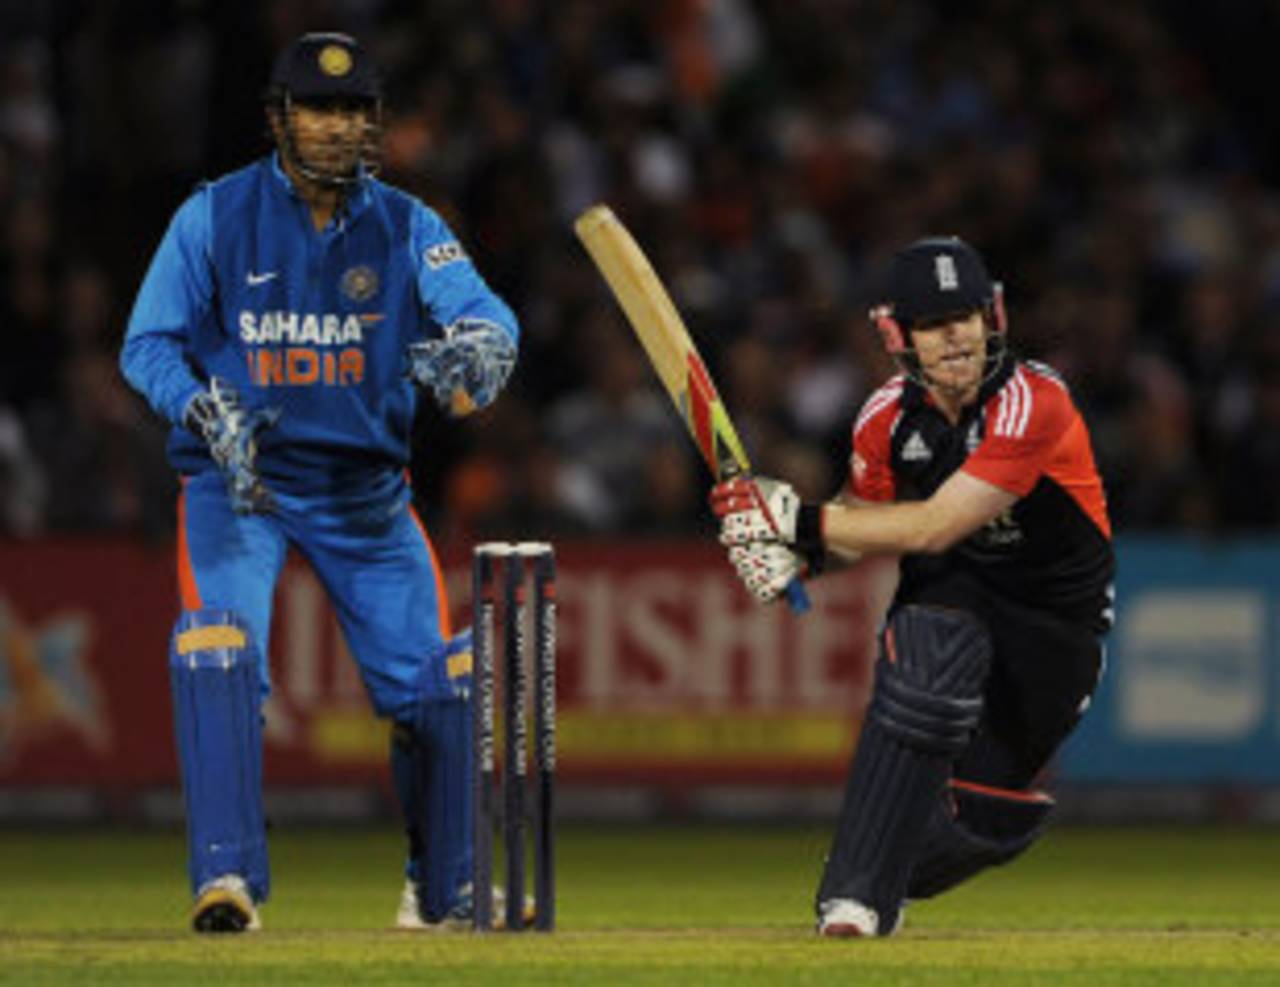 Eoin Morgan won't be around to guide England's middle order in the subcontinent&nbsp;&nbsp;&bull;&nbsp;&nbsp;Getty Images